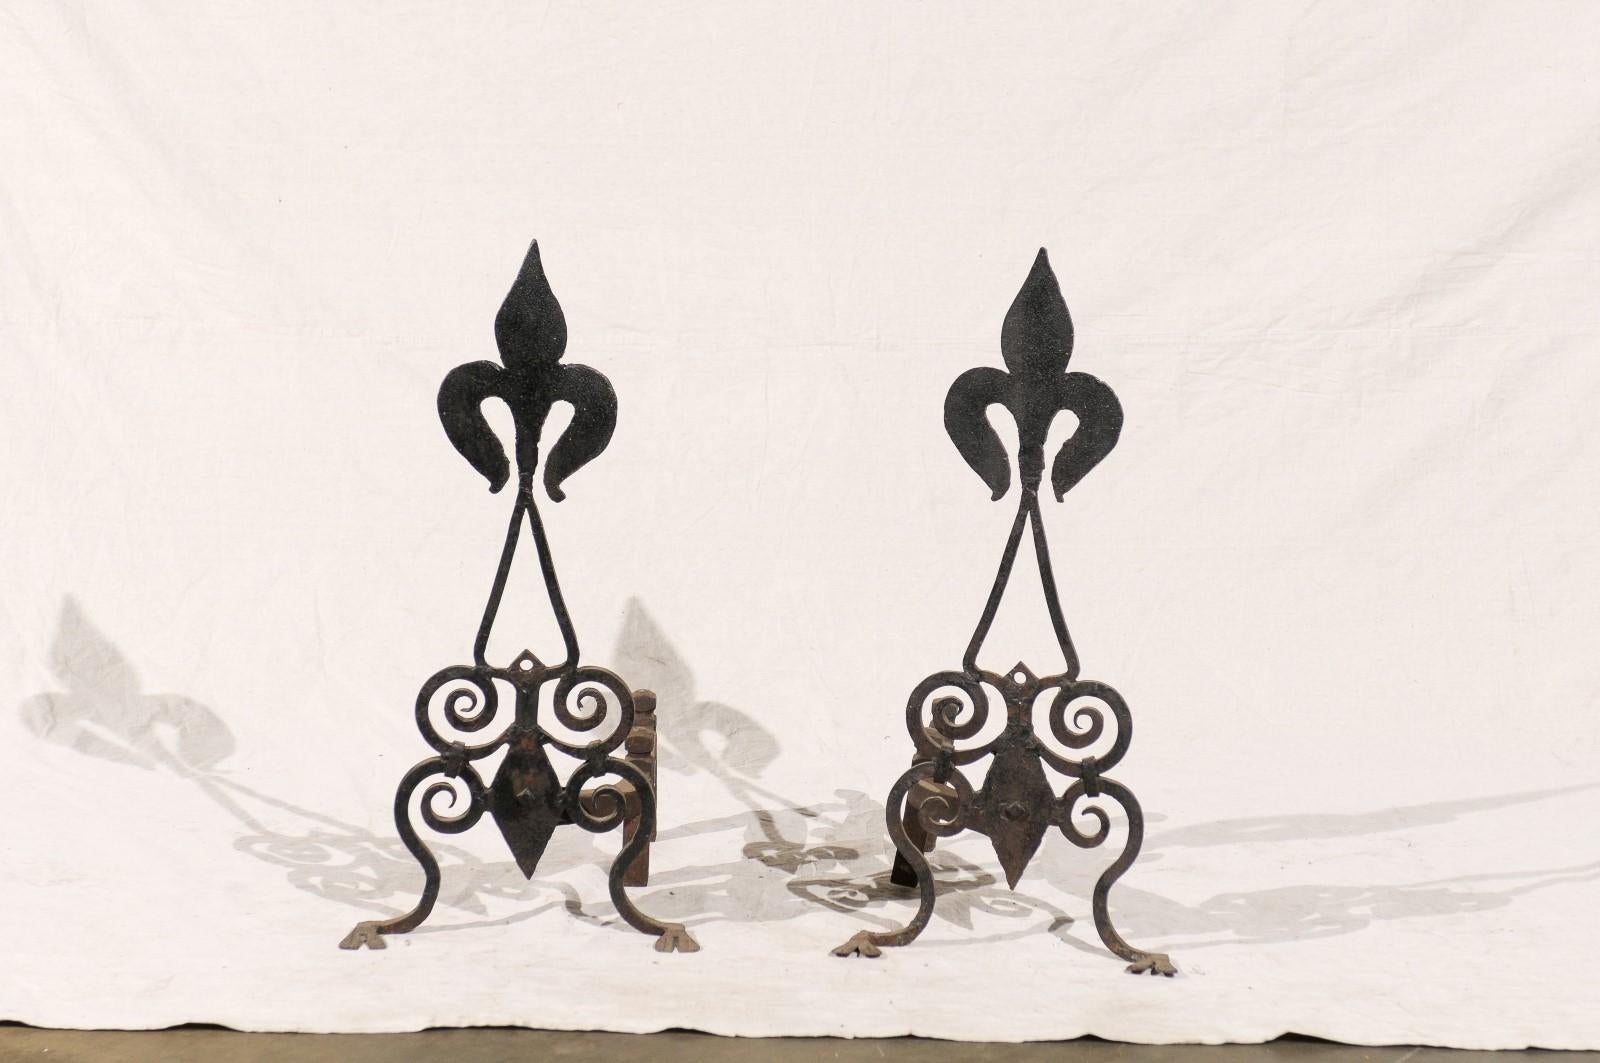 Pair of Late 19th-Early 20th Century American Black Fleur-de-Lis Andirons In Good Condition For Sale In Atlanta, GA